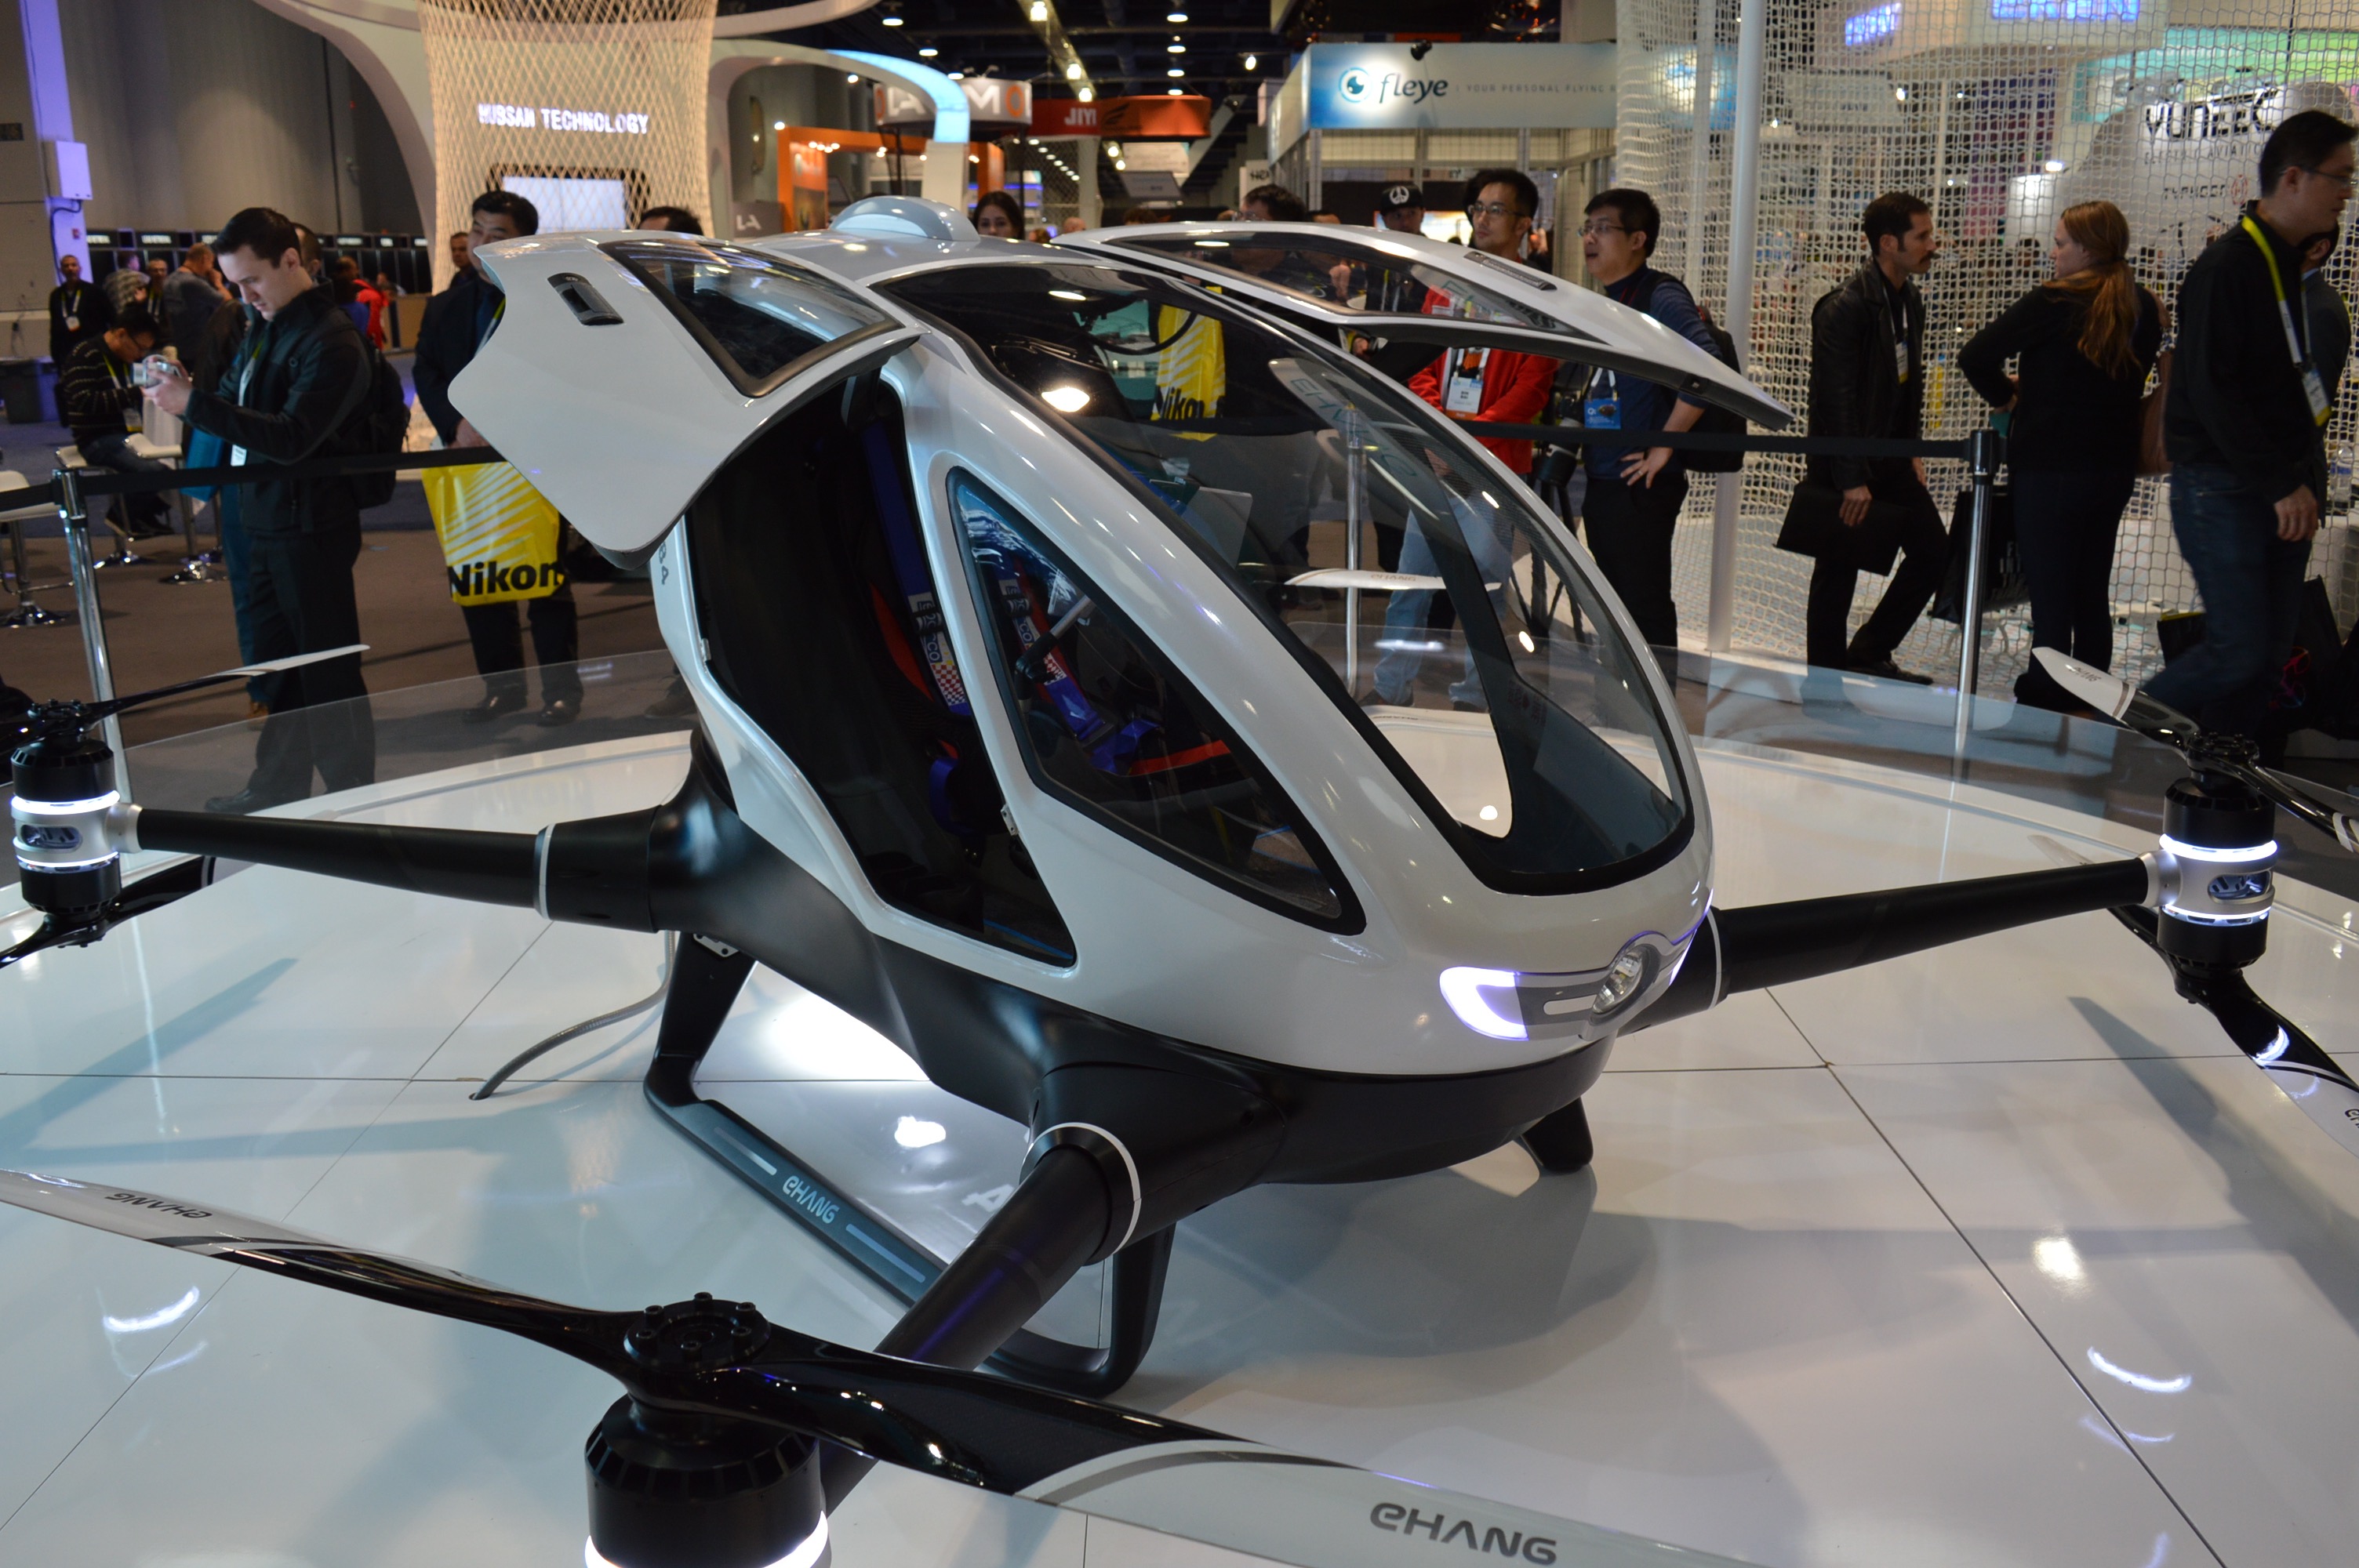 malm Ventilere Manifold The EHang 184 Is A Human-Sized Drone Taking Off At CES | TechCrunch